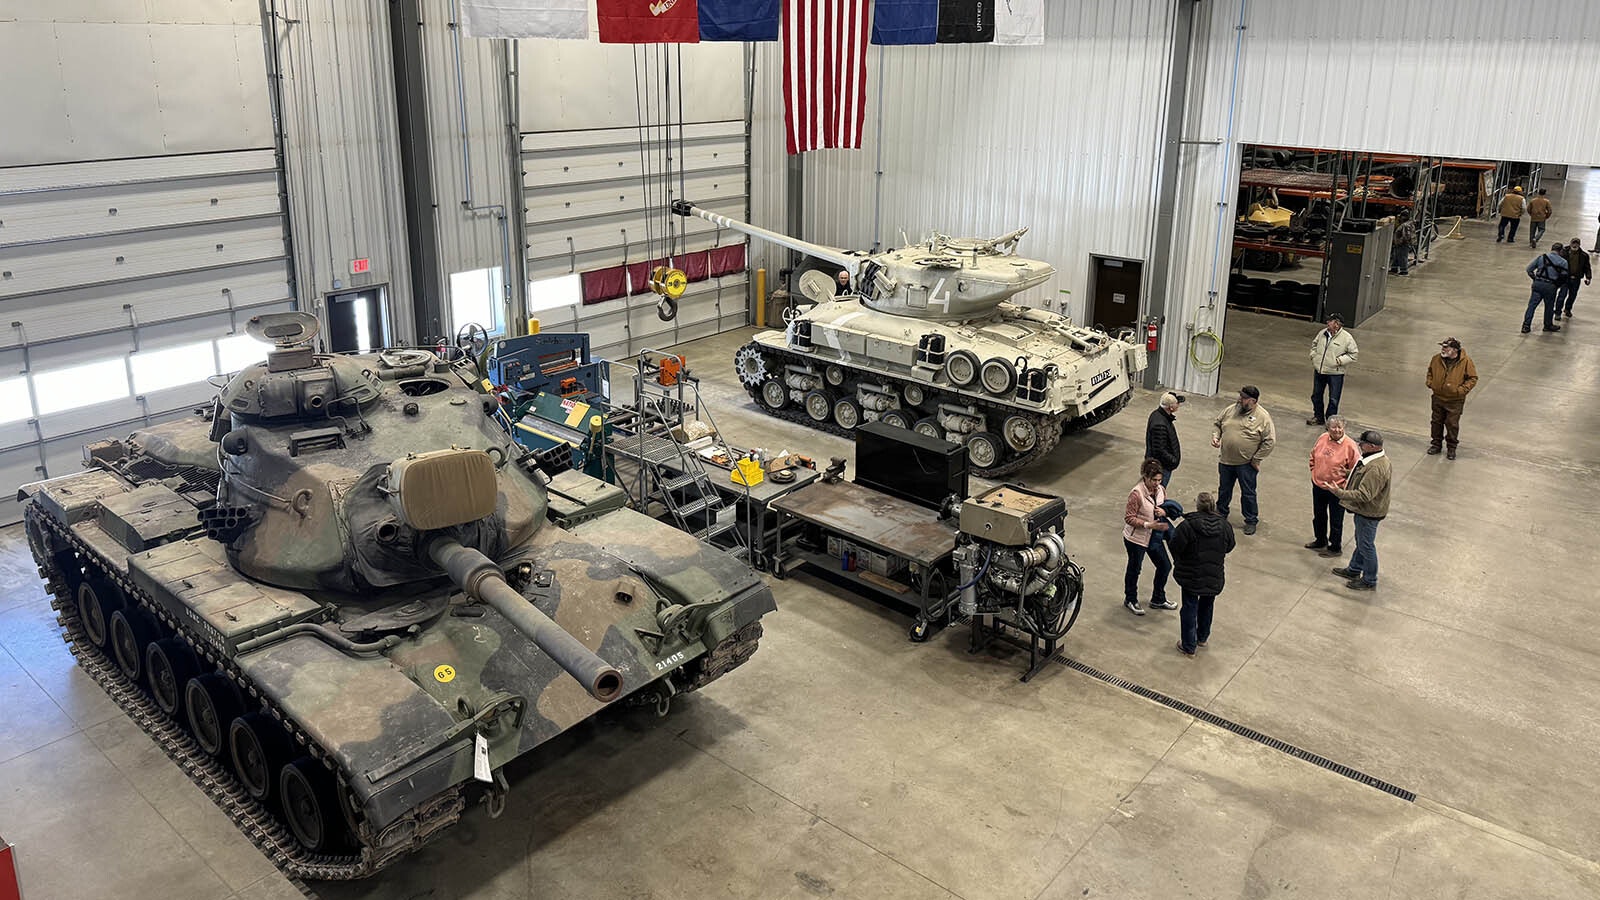 An overhead view of the maintenance bay in the shop. The yellow crane near the ceiling has a 20-ton capacity for moving the enormously heavy components of tanks, trucks, and other military vehicles.